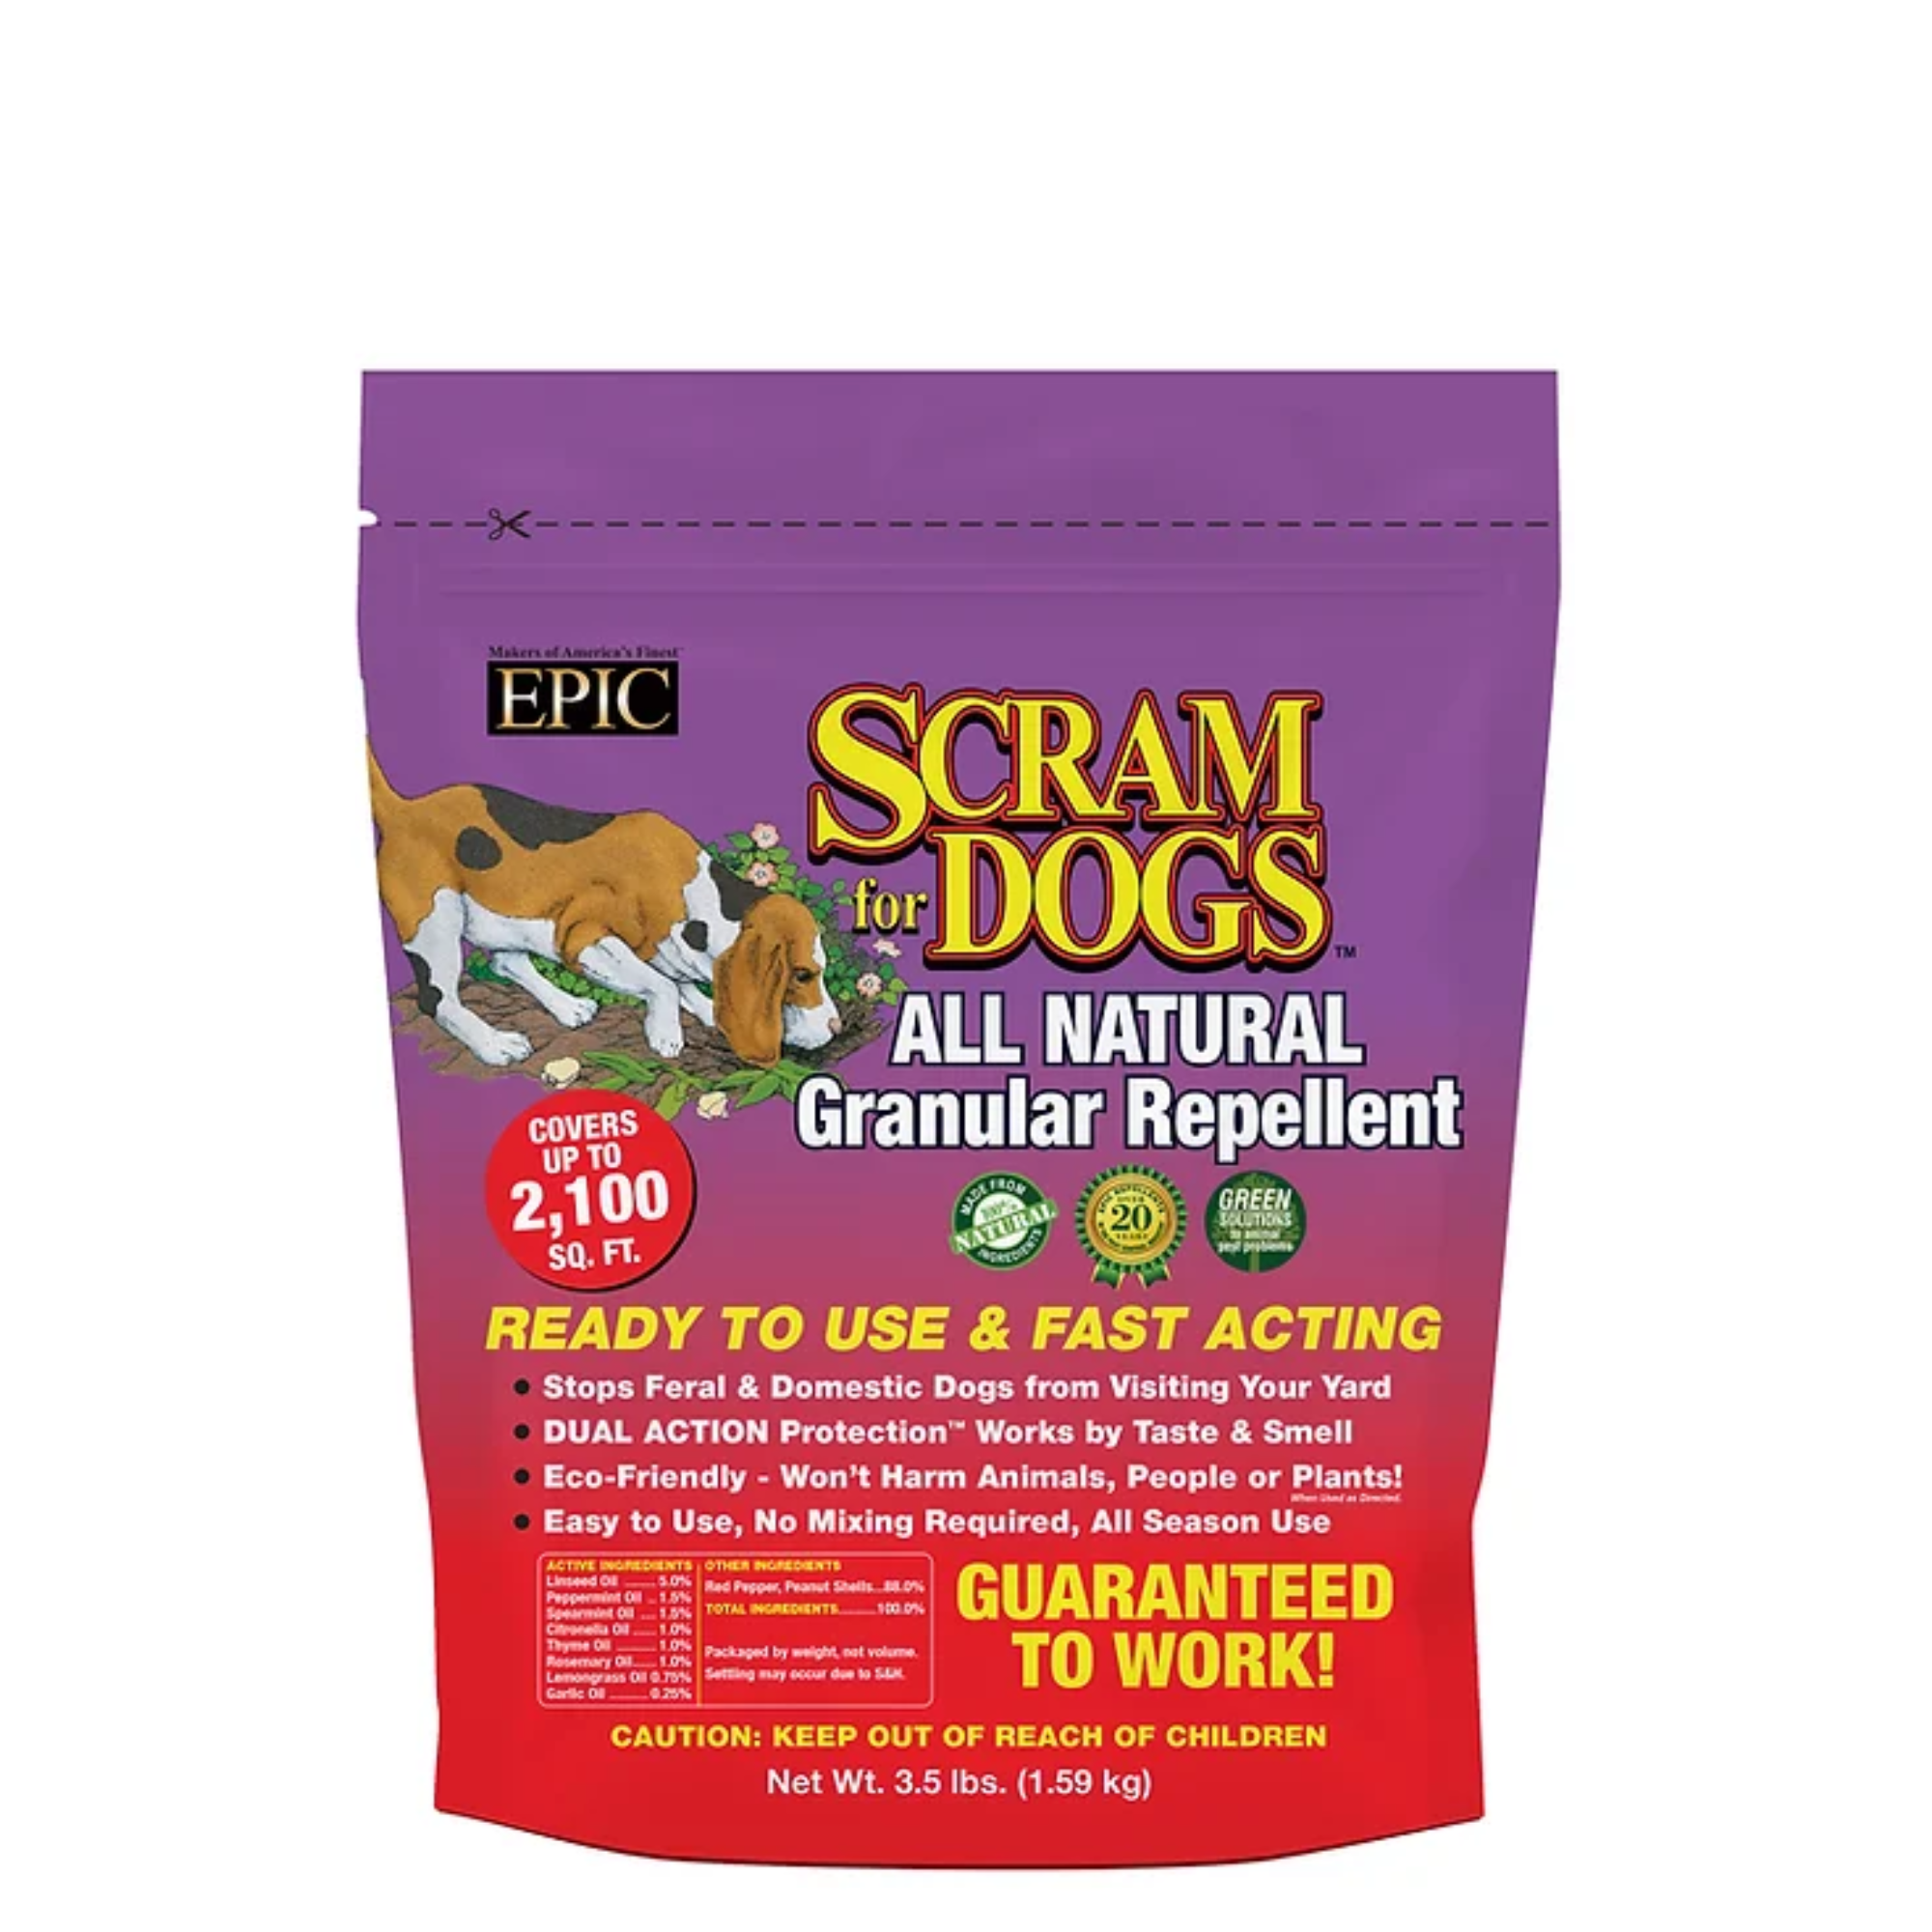 EPIC Scram for Dogs All Natural Ready To Use Outdoor Granular Animal Repellent Resealable Bag, 3.5lbs